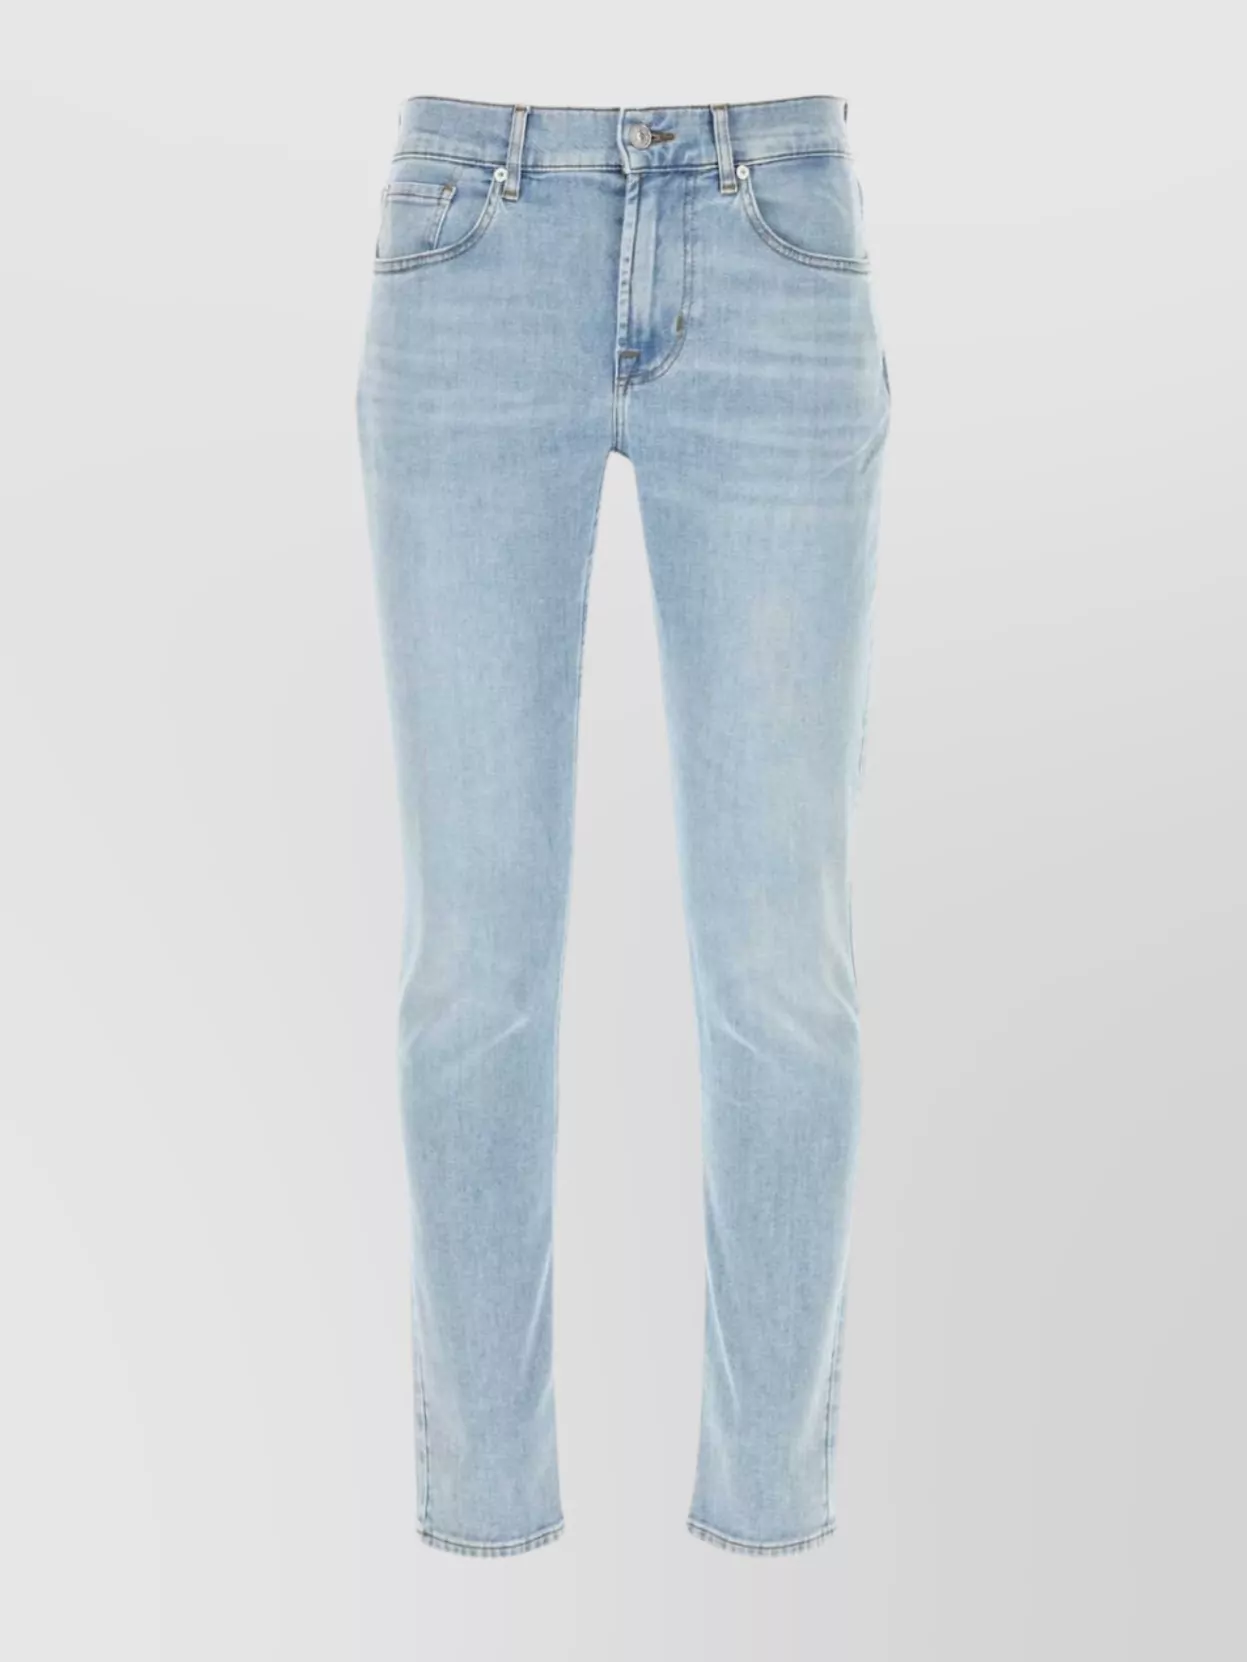 Shop 7 For All Mankind Slimmy Tapered Stretch Denim Jeans